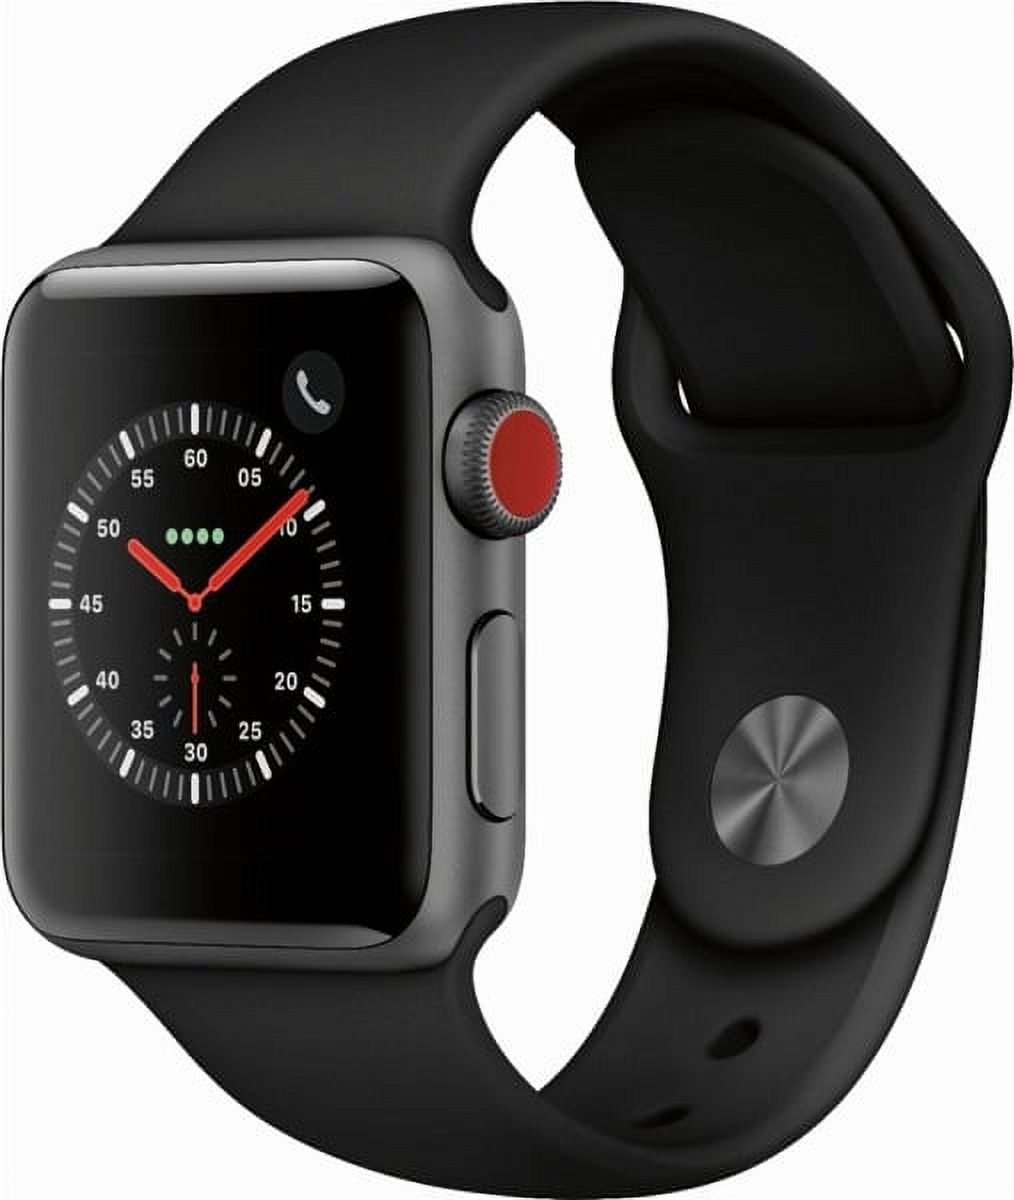 Apple Watch Series 3 GPS + Cellular - 38mm - Sport Band - Aluminum Case -Space Gray/Black - image 2 of 2